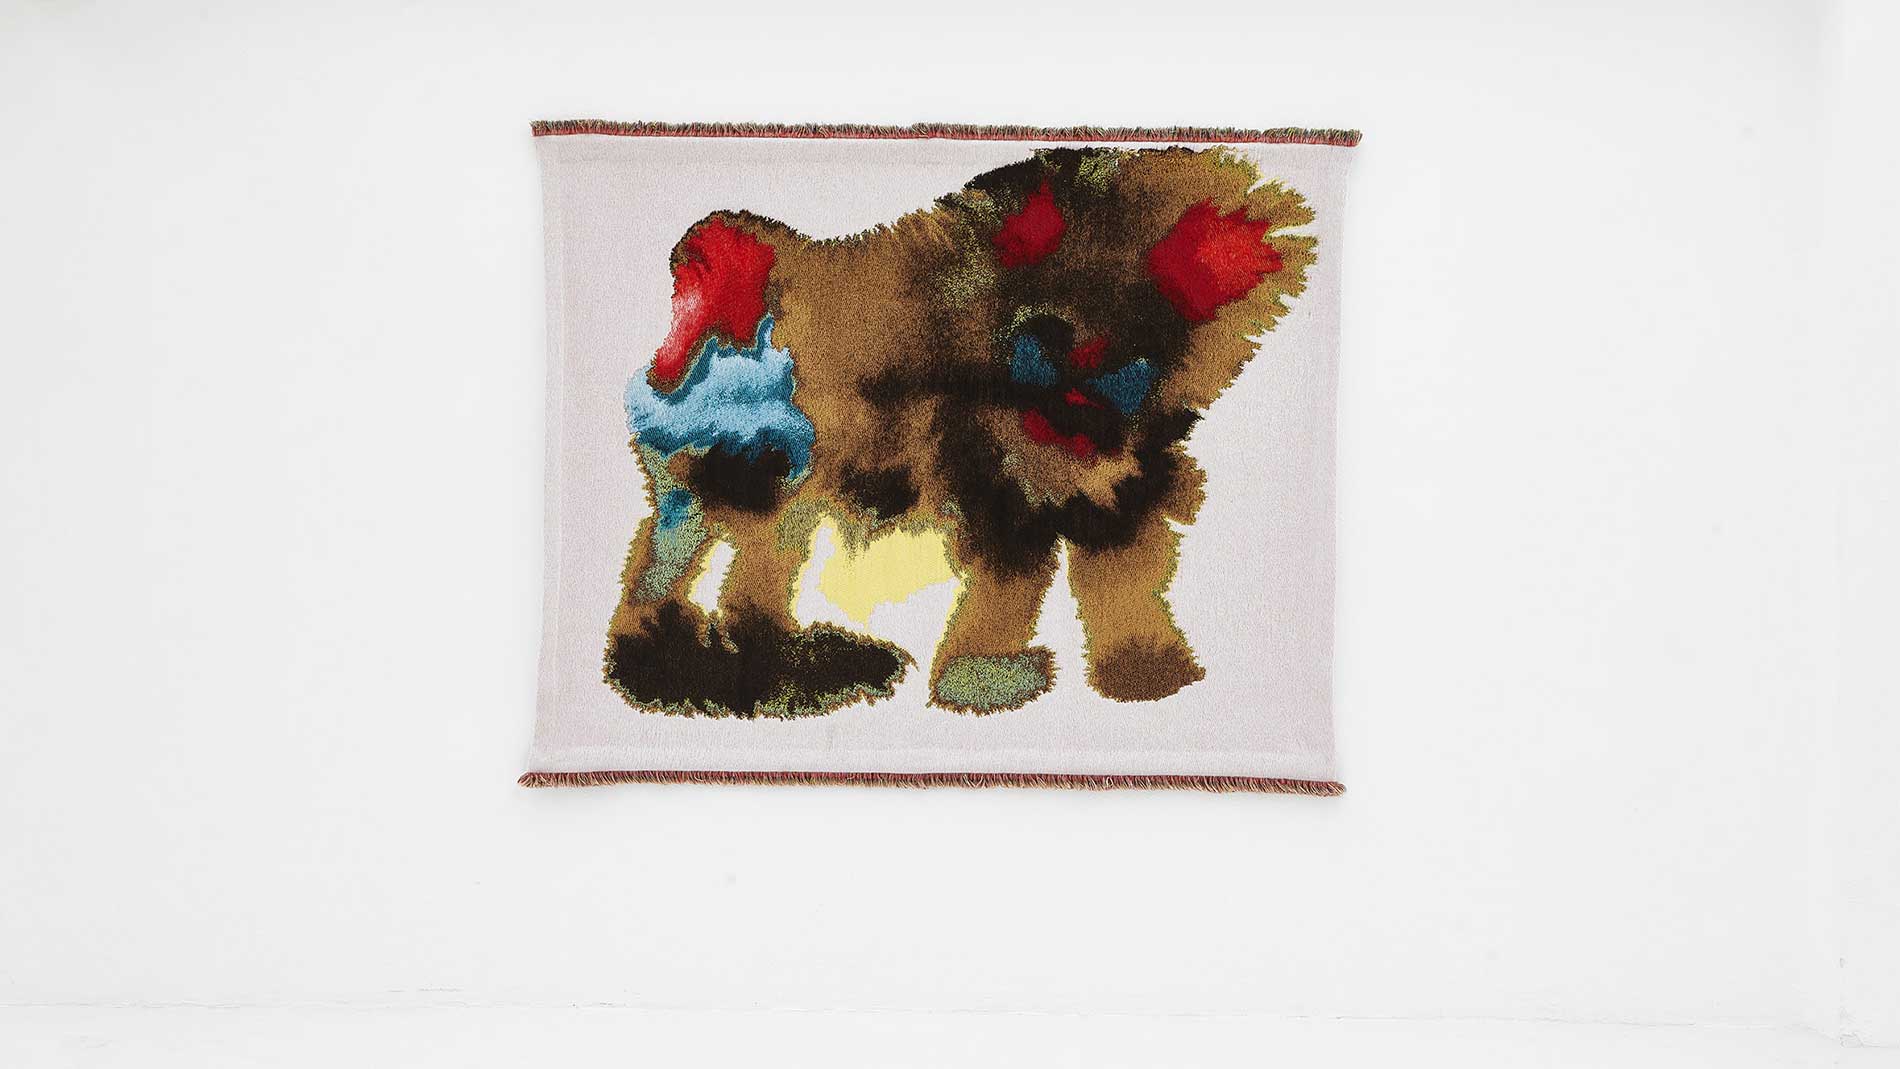 Rop van Mierlos illustrations for the Wild Animals book of 2010 has been made into handtufted woven tapestry. Made in in collaboration with Tilburg TextielLab.